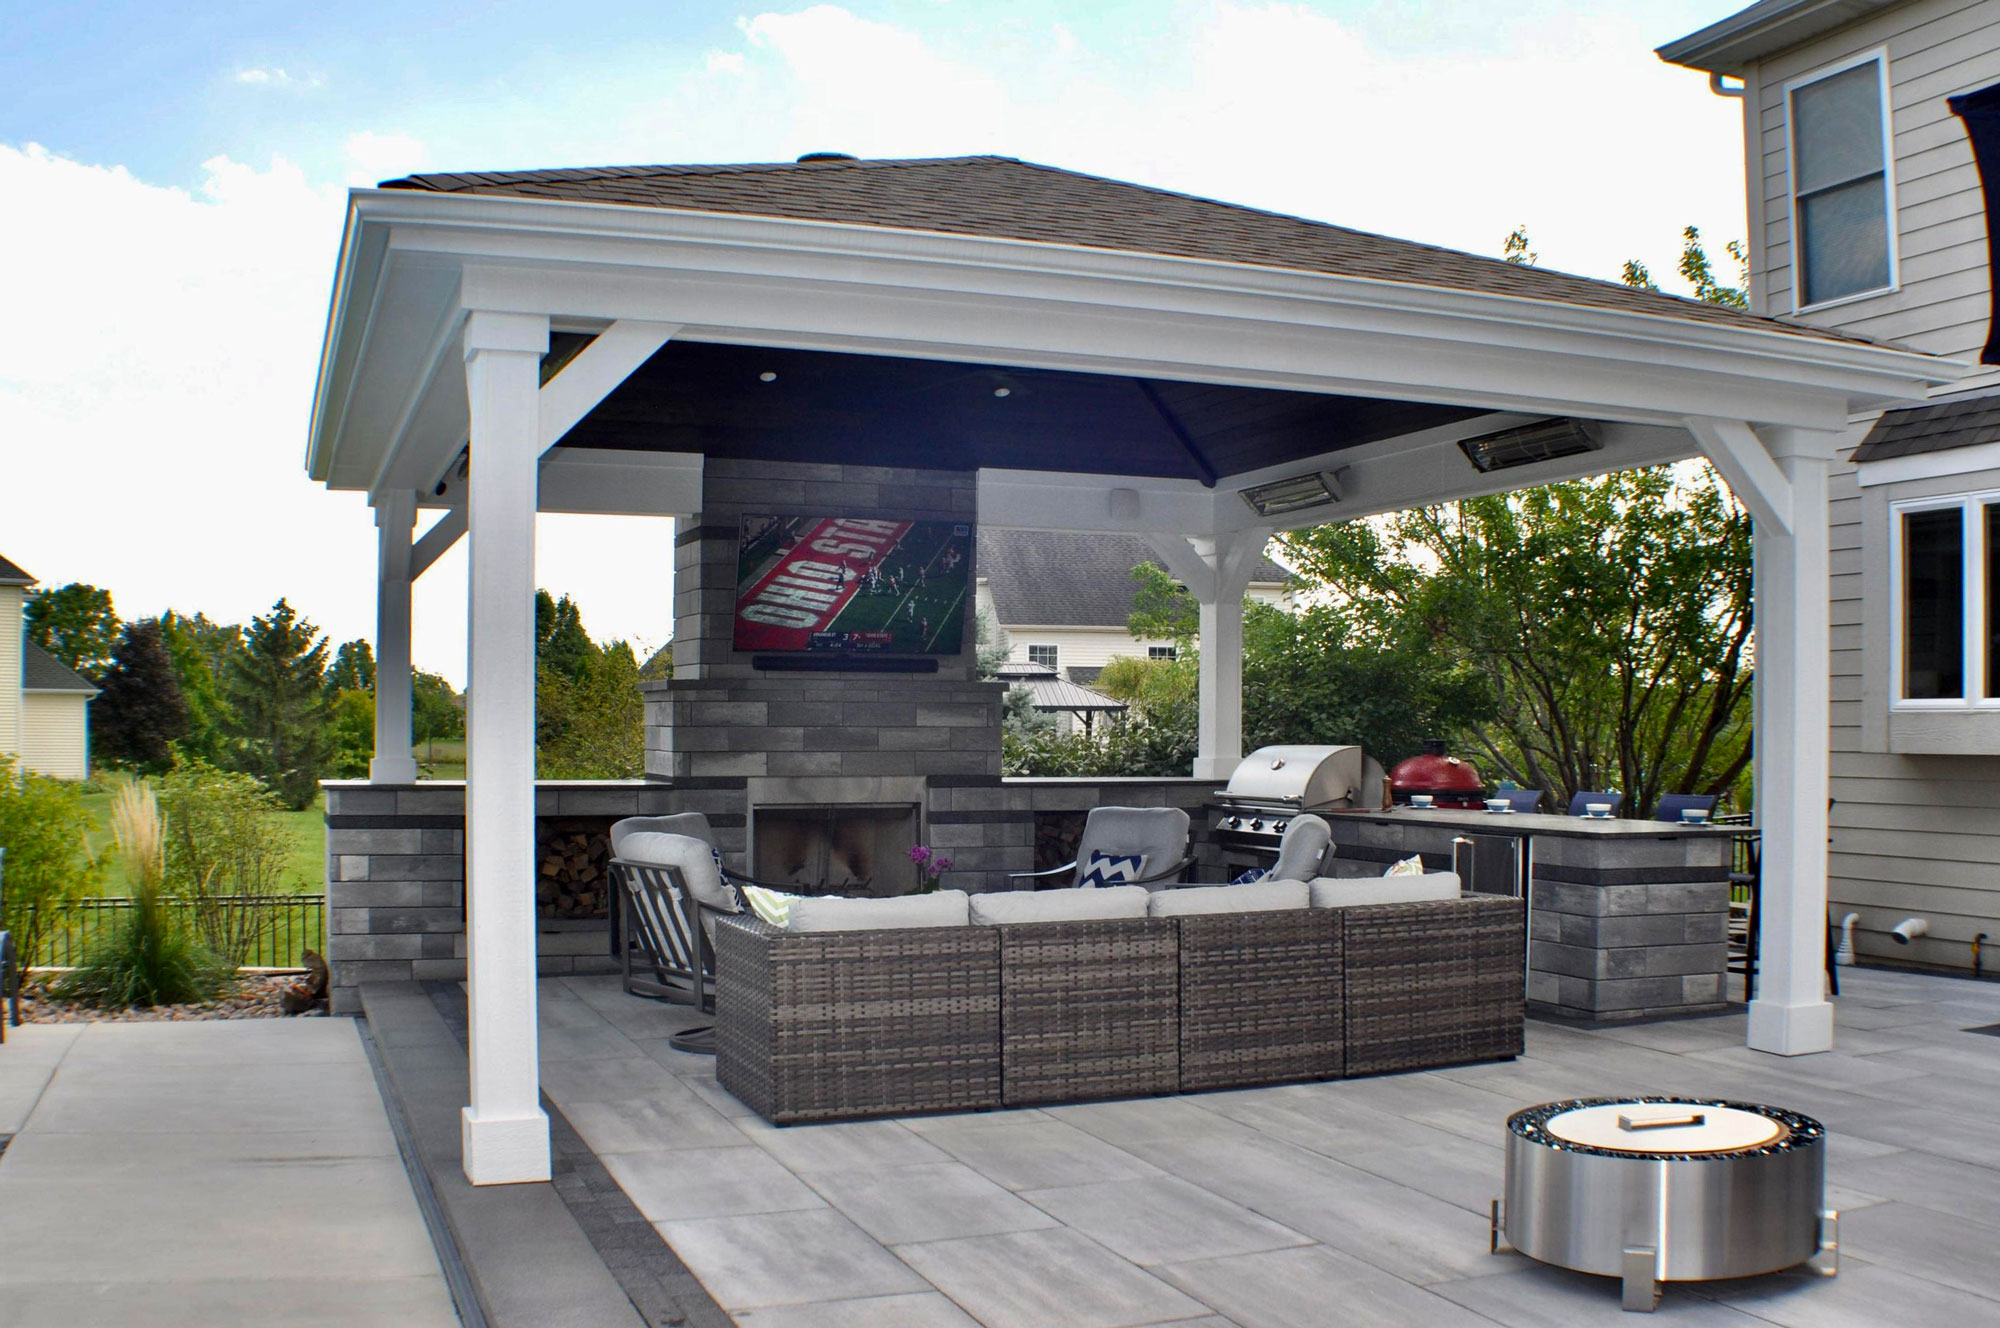 Patio with large gable roof structure over outdoor living room area.